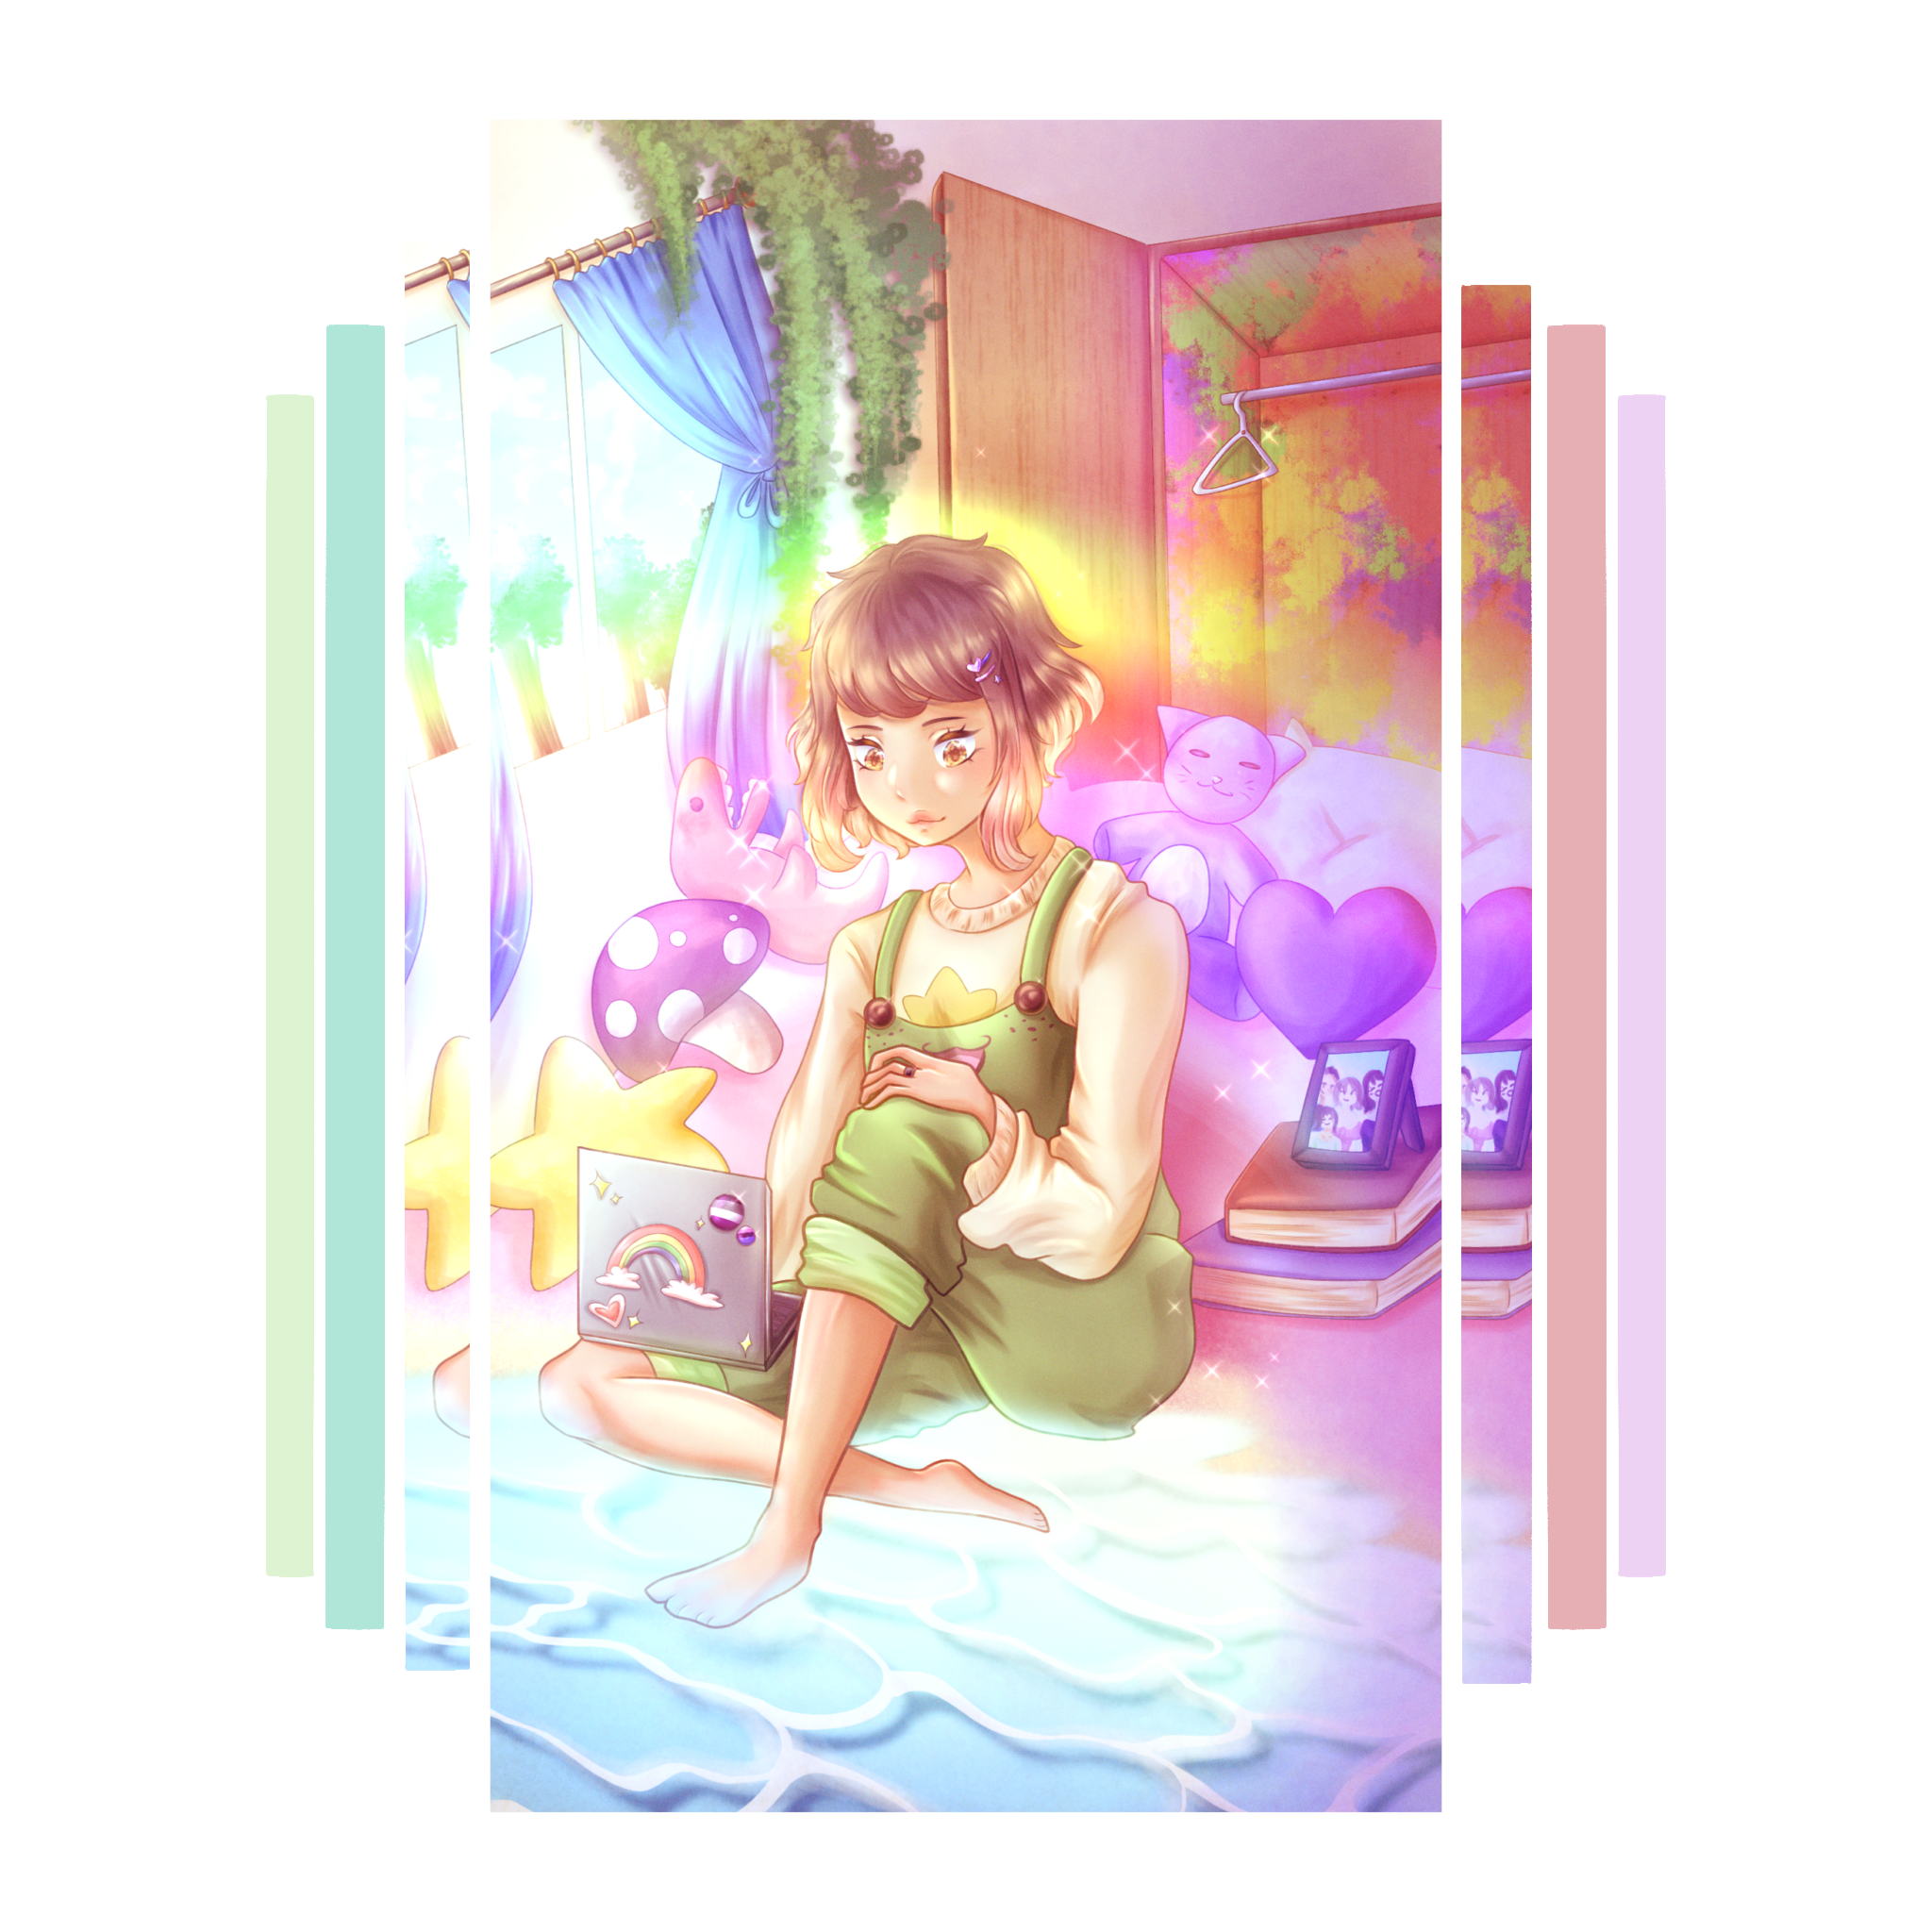 A girl sitting on a bed in a colorful room surrounded by Room Pride T-Shirt artwork.